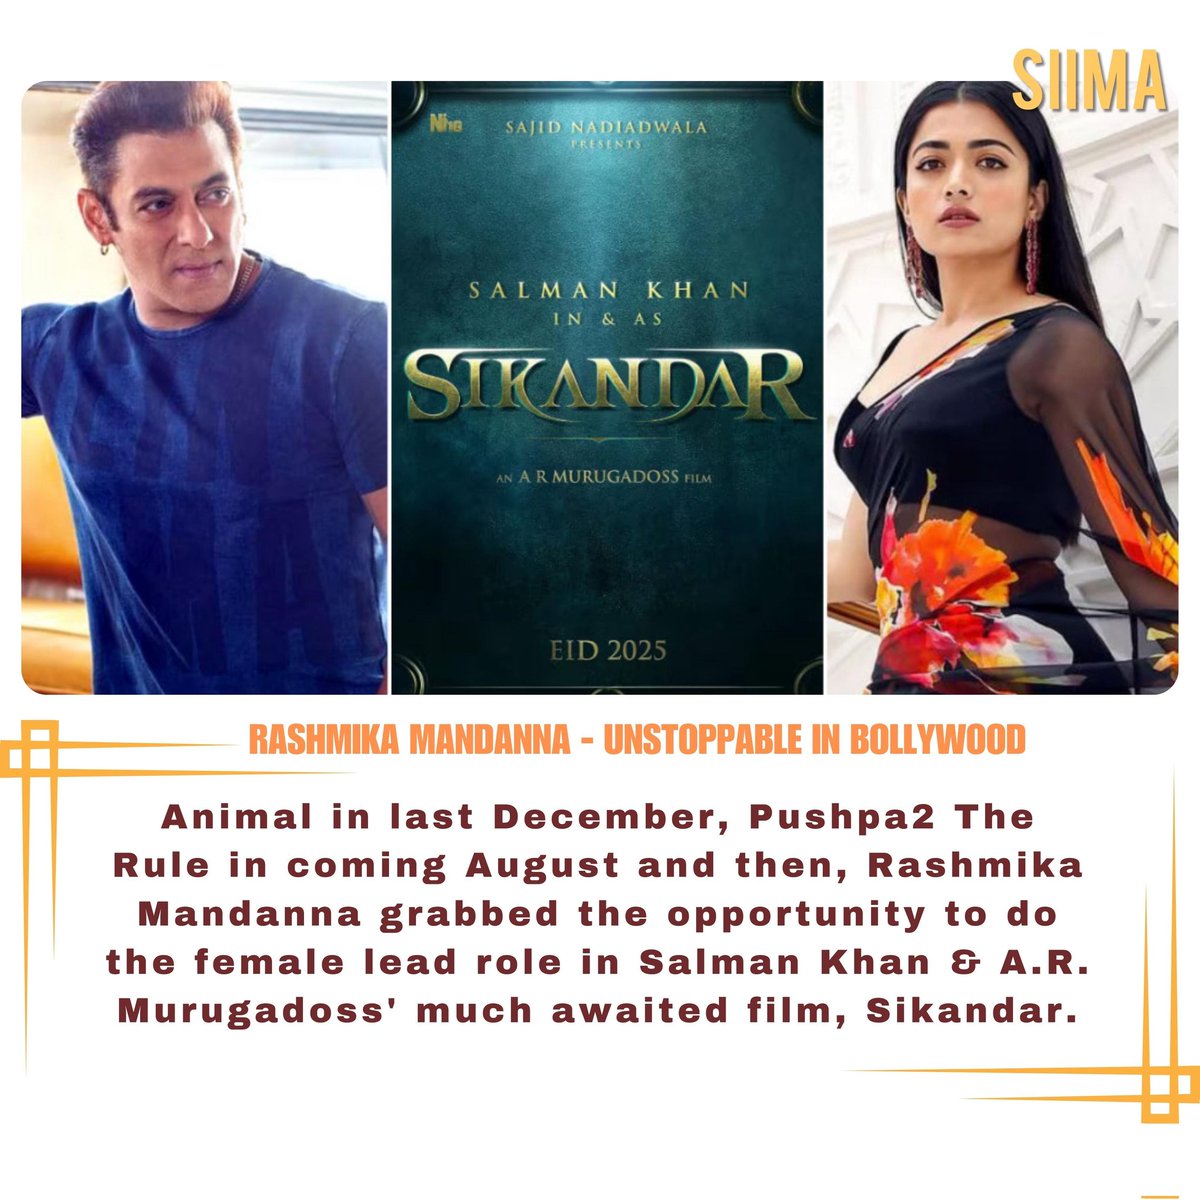 Rashmika Mandhana will be the leading lady opposite #SalmanKhan. From an animal-filled December to ruling Pushpa 2 in August, now boldly stepping into the limelight with Salman Khan & A.R. Murugadoss for 'Sikandar'. 🎬🌟 #RashmikaMandanna #Sikandar #SalmanKhan #ARMurugadoss…